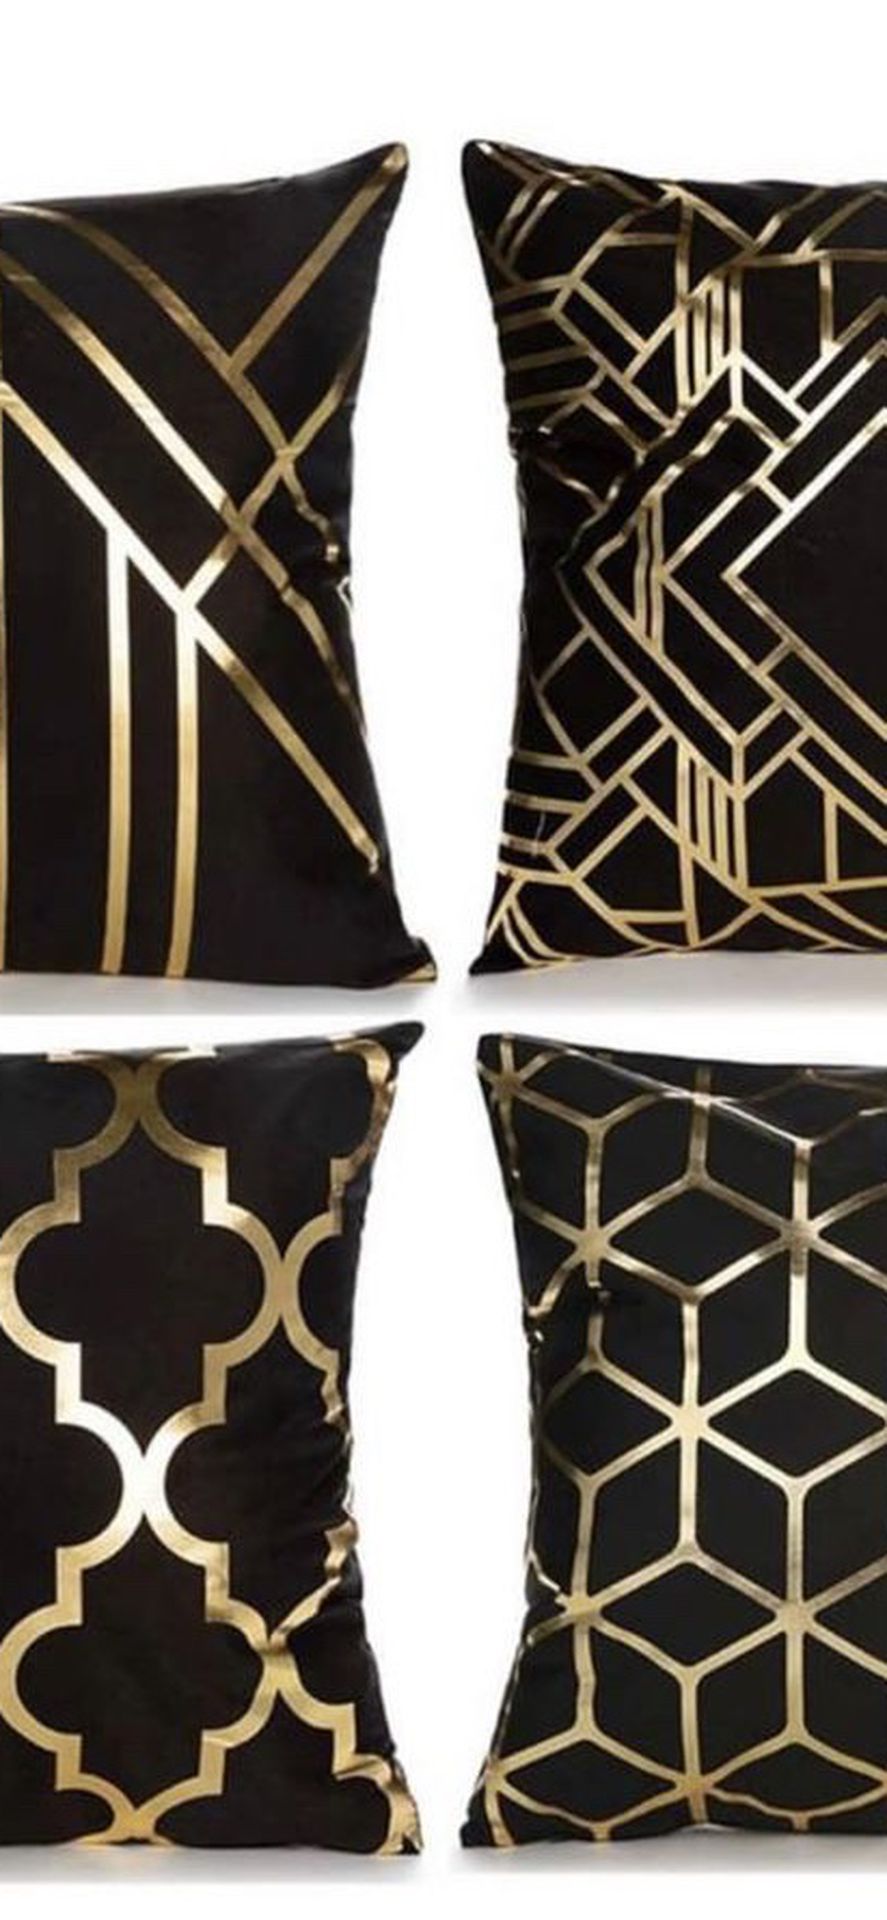 Black & Gold Decorative Pillow Cases - Different Patterns 5 Cases 18”x18” NOT FREE-SEND OFFER